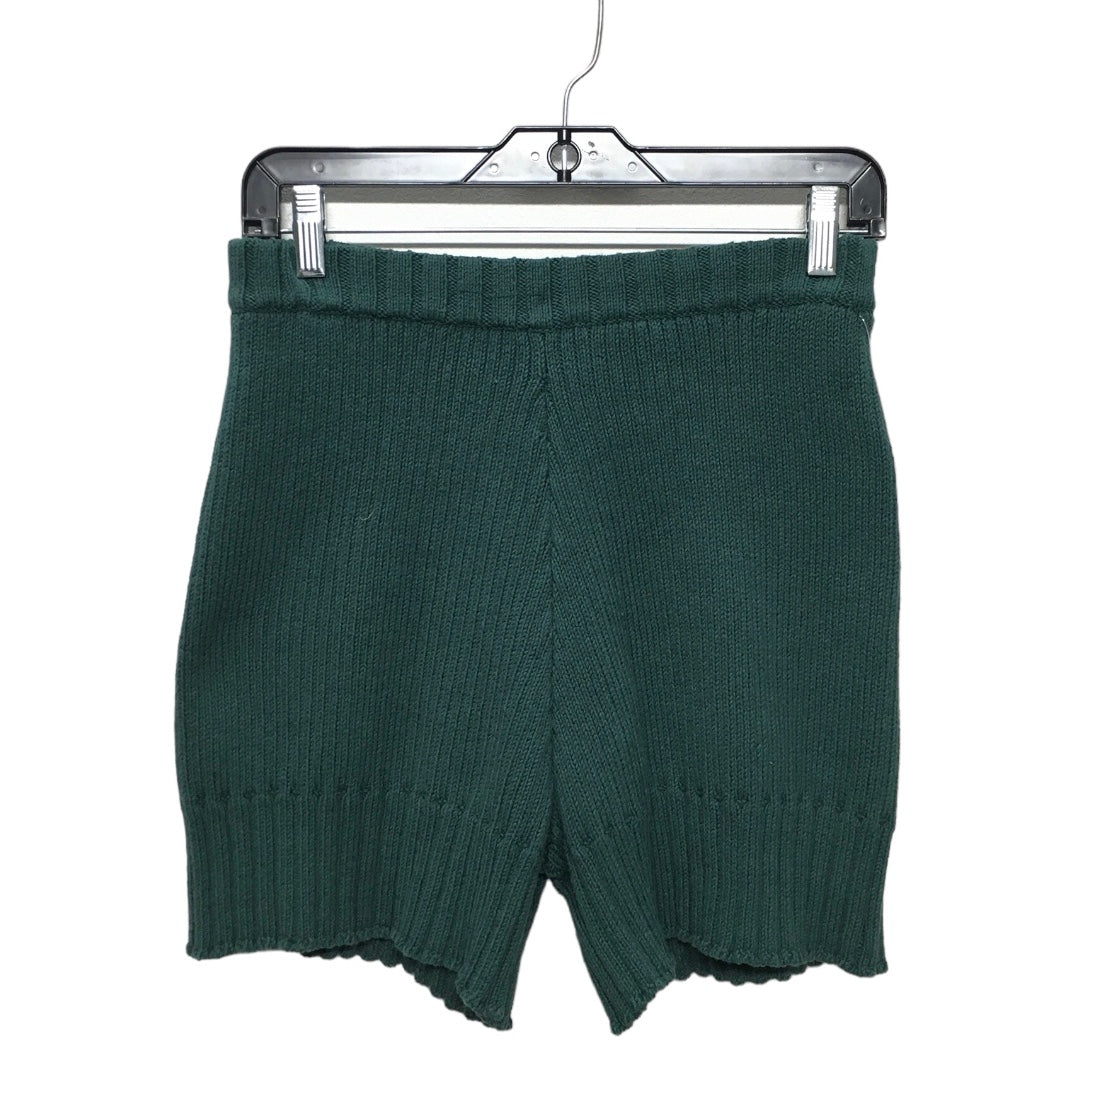 Green Shorts Set Free People, Size S